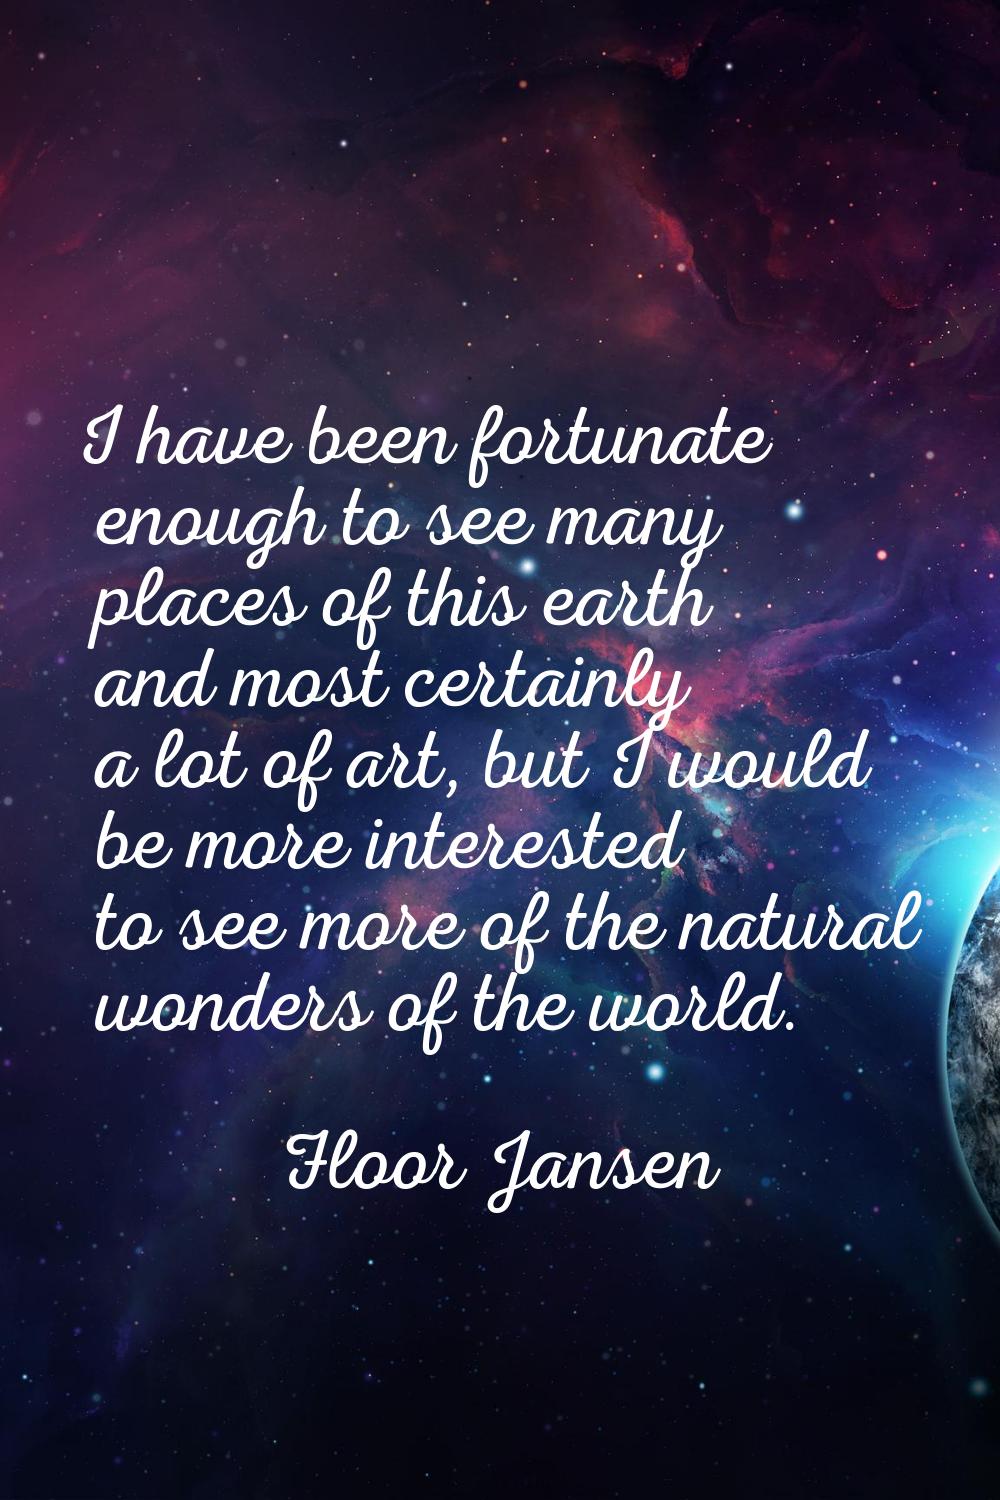 I have been fortunate enough to see many places of this earth and most certainly a lot of art, but 